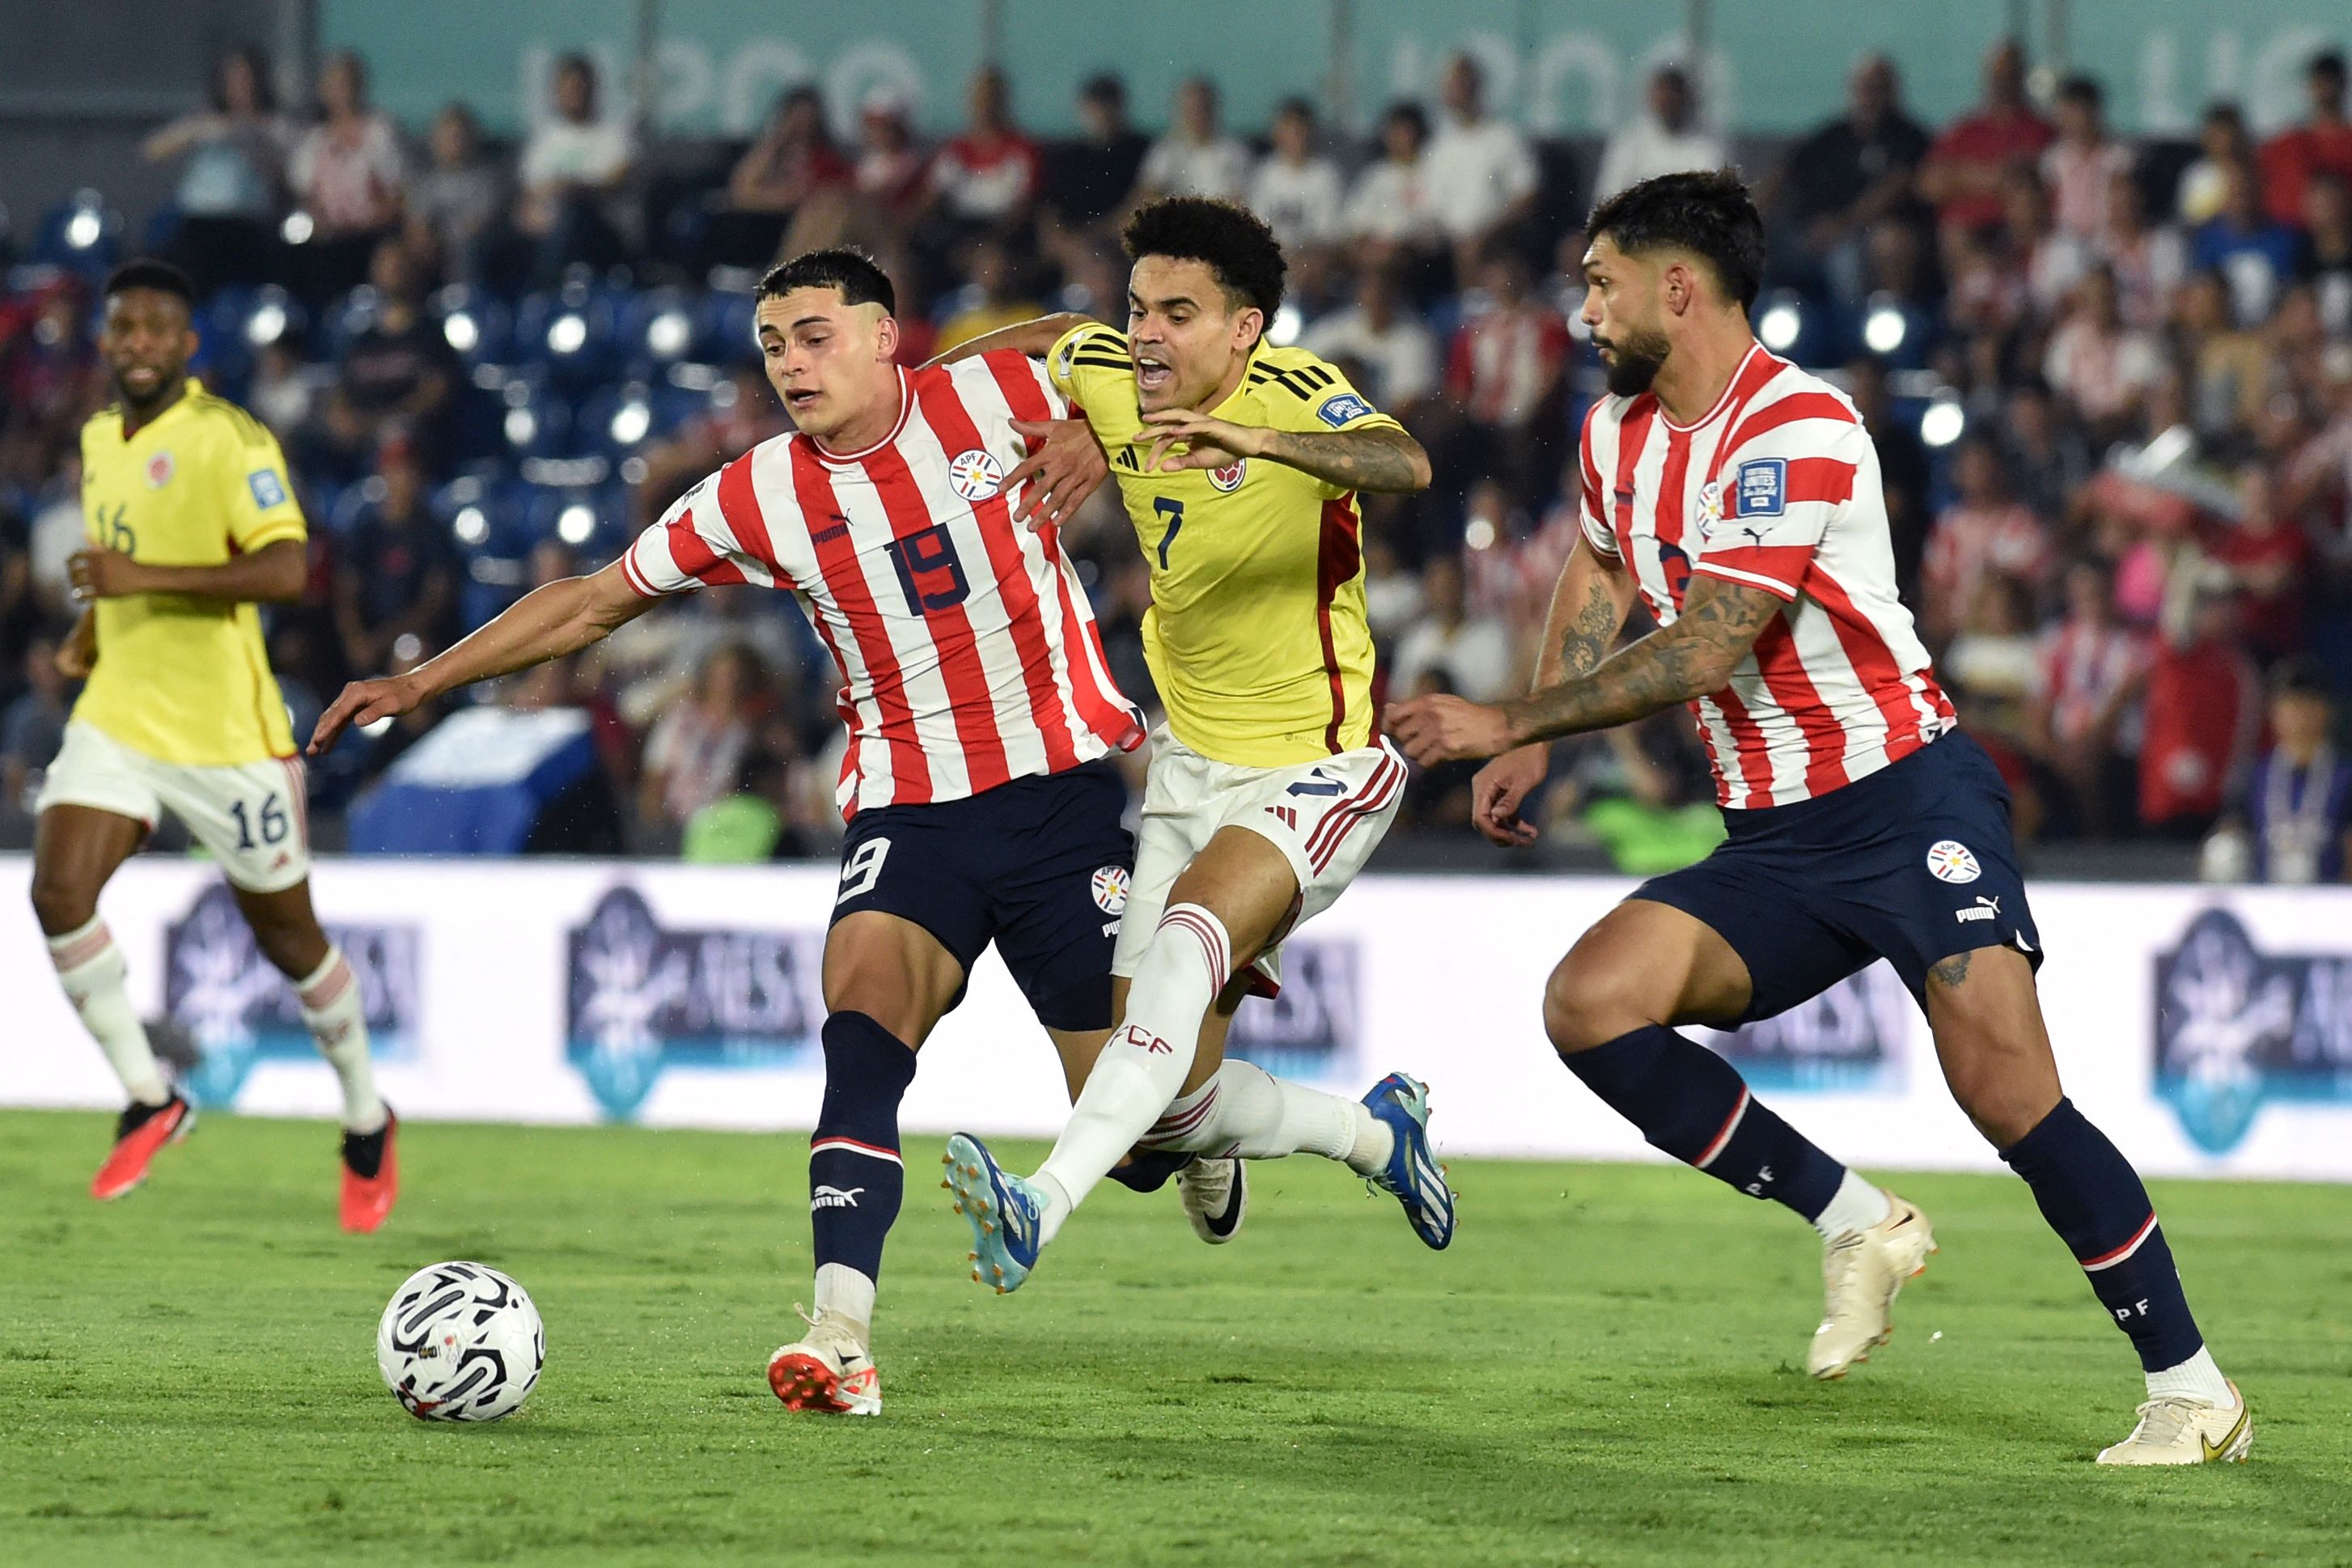 Paraguay's forward Ramon Sosa (L) fights for the ball with Colombia's forward Luis Diaz during the 2026 FIFA World Cup South American qualification football match between Paraguay and Colombia at the Defensores del Chaco stadium in Asuncion on November 21, 2023. (Photo by NORBERTO DUARTE / AFP)